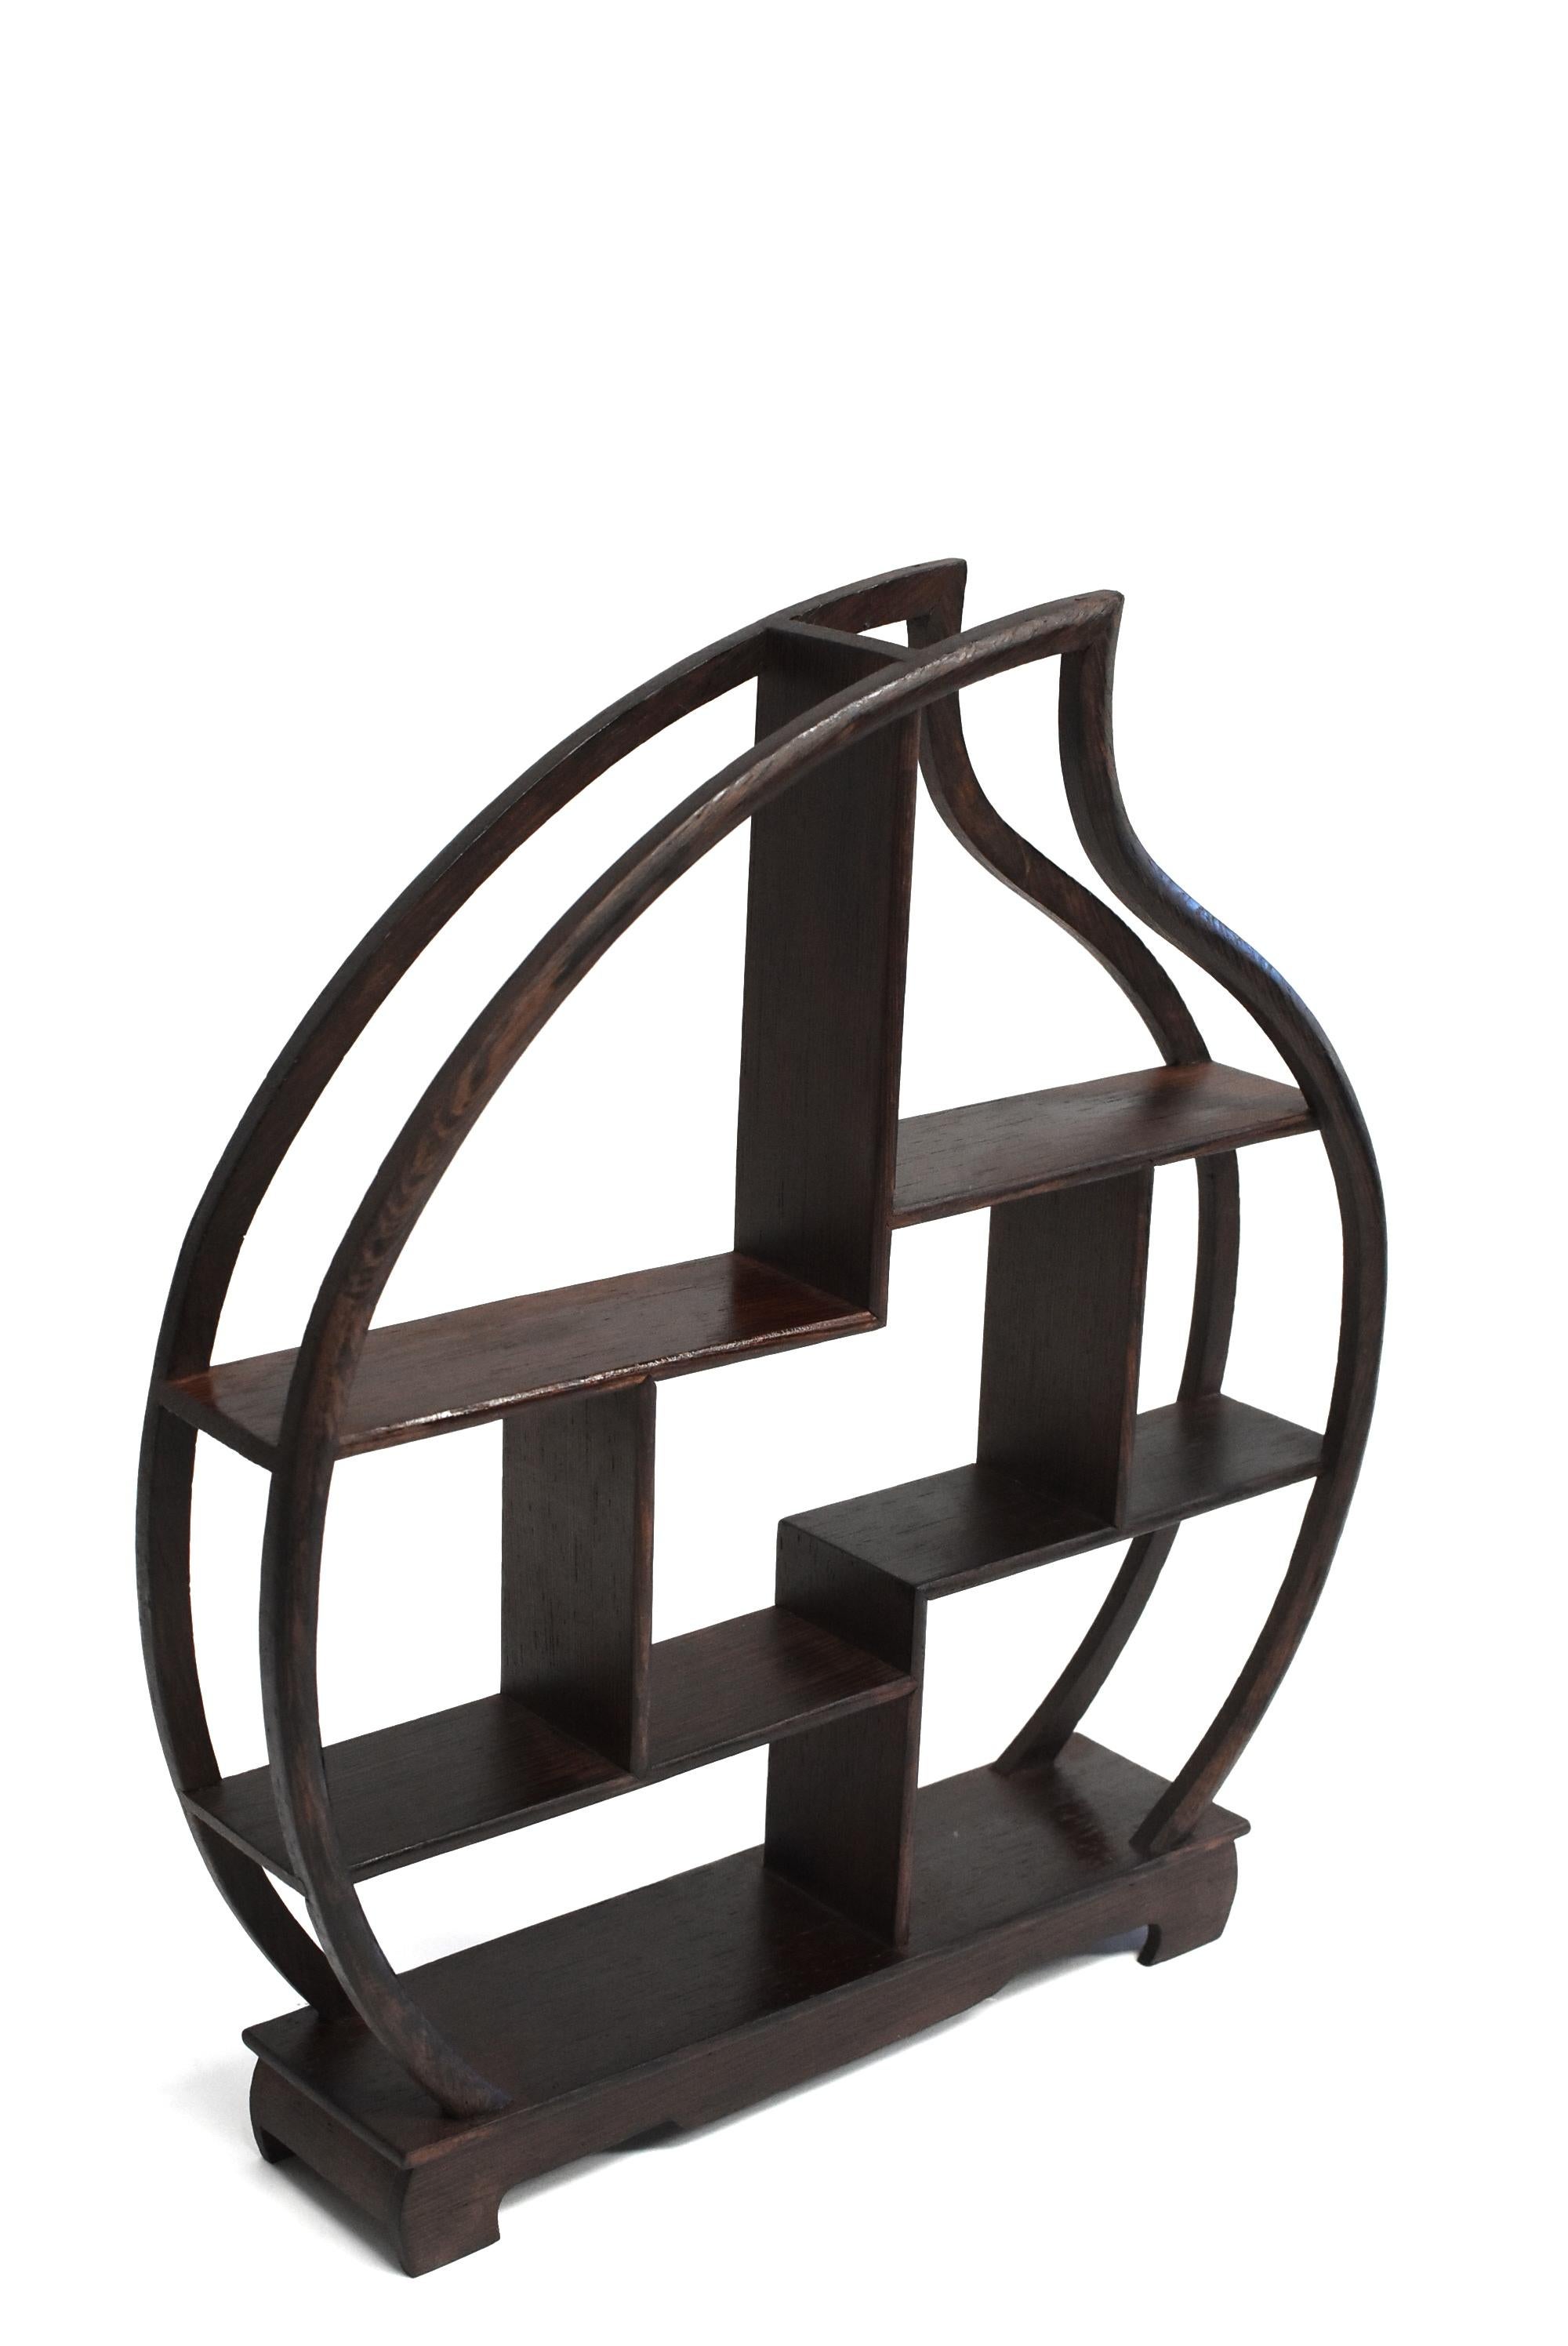 A fine ji-chi-mu solid wenge wood Stand for display of your miniature collections. Beautiful, elegant peach shape. There are eight spaces of various heights and sizes to suit your little treasures. The wood is beautiful with distinctive swirls and